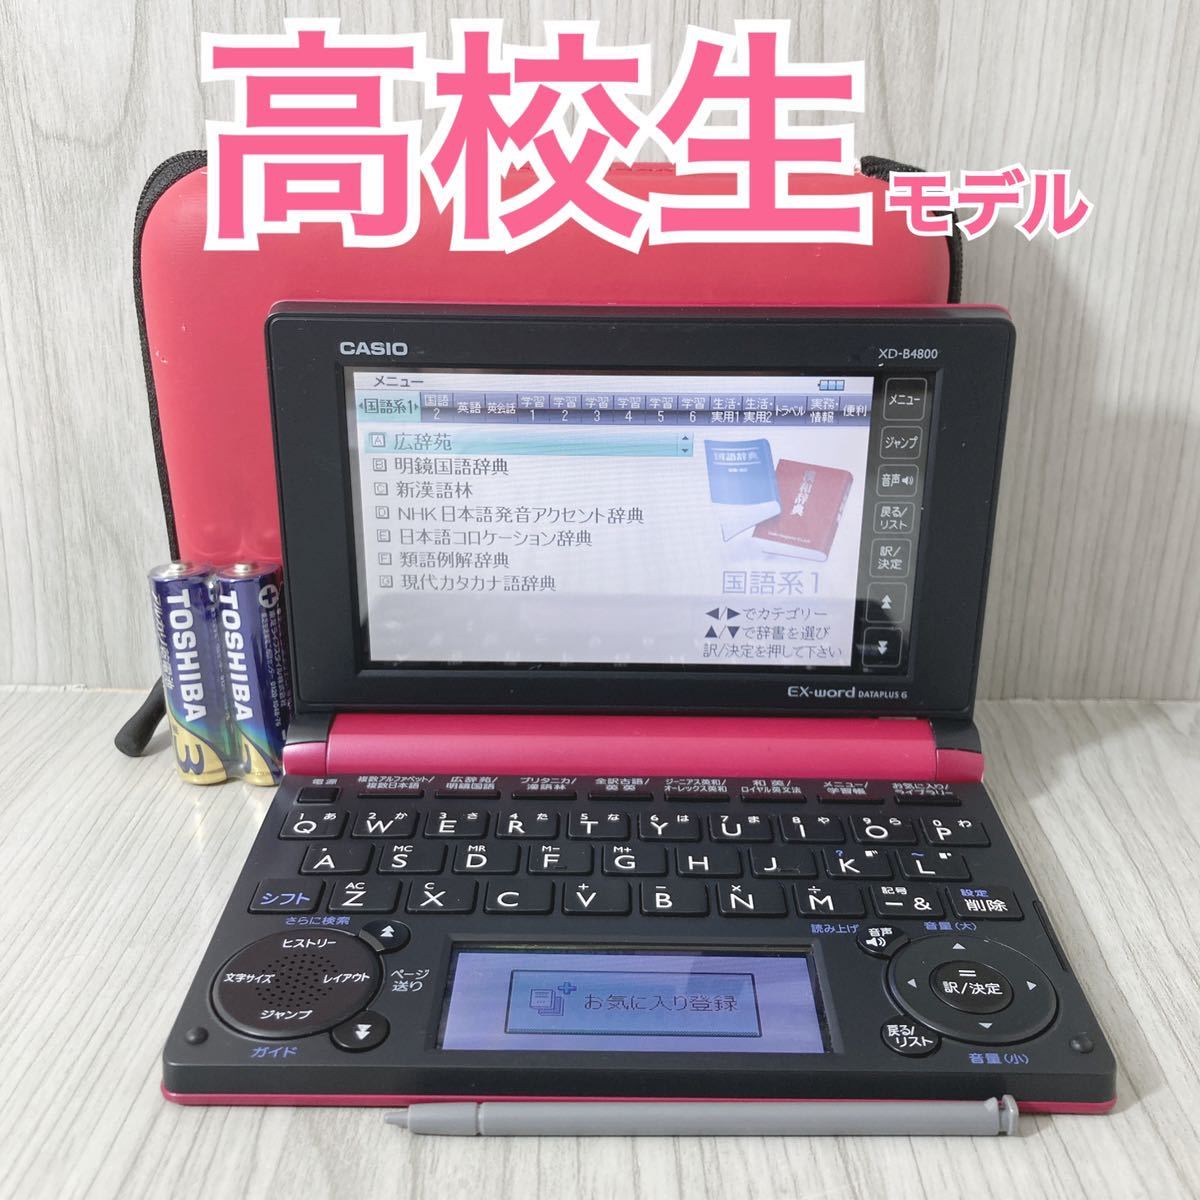  computerized dictionary Θ high school student model XD-B4800MP magenta pink case attaching ΘA17pt